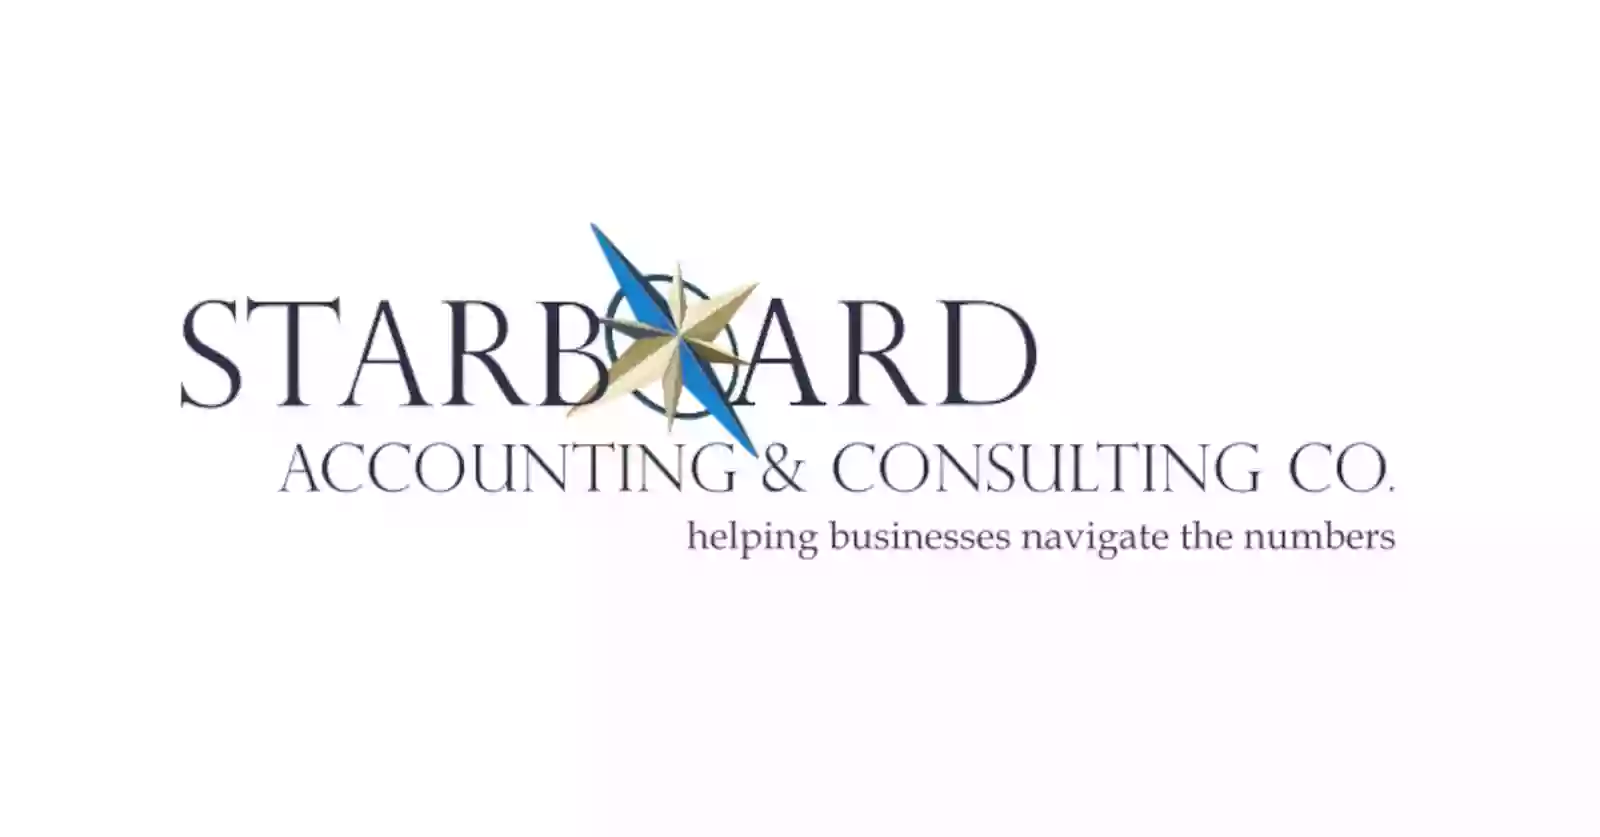 Starboard Accounting & Consulting Co.